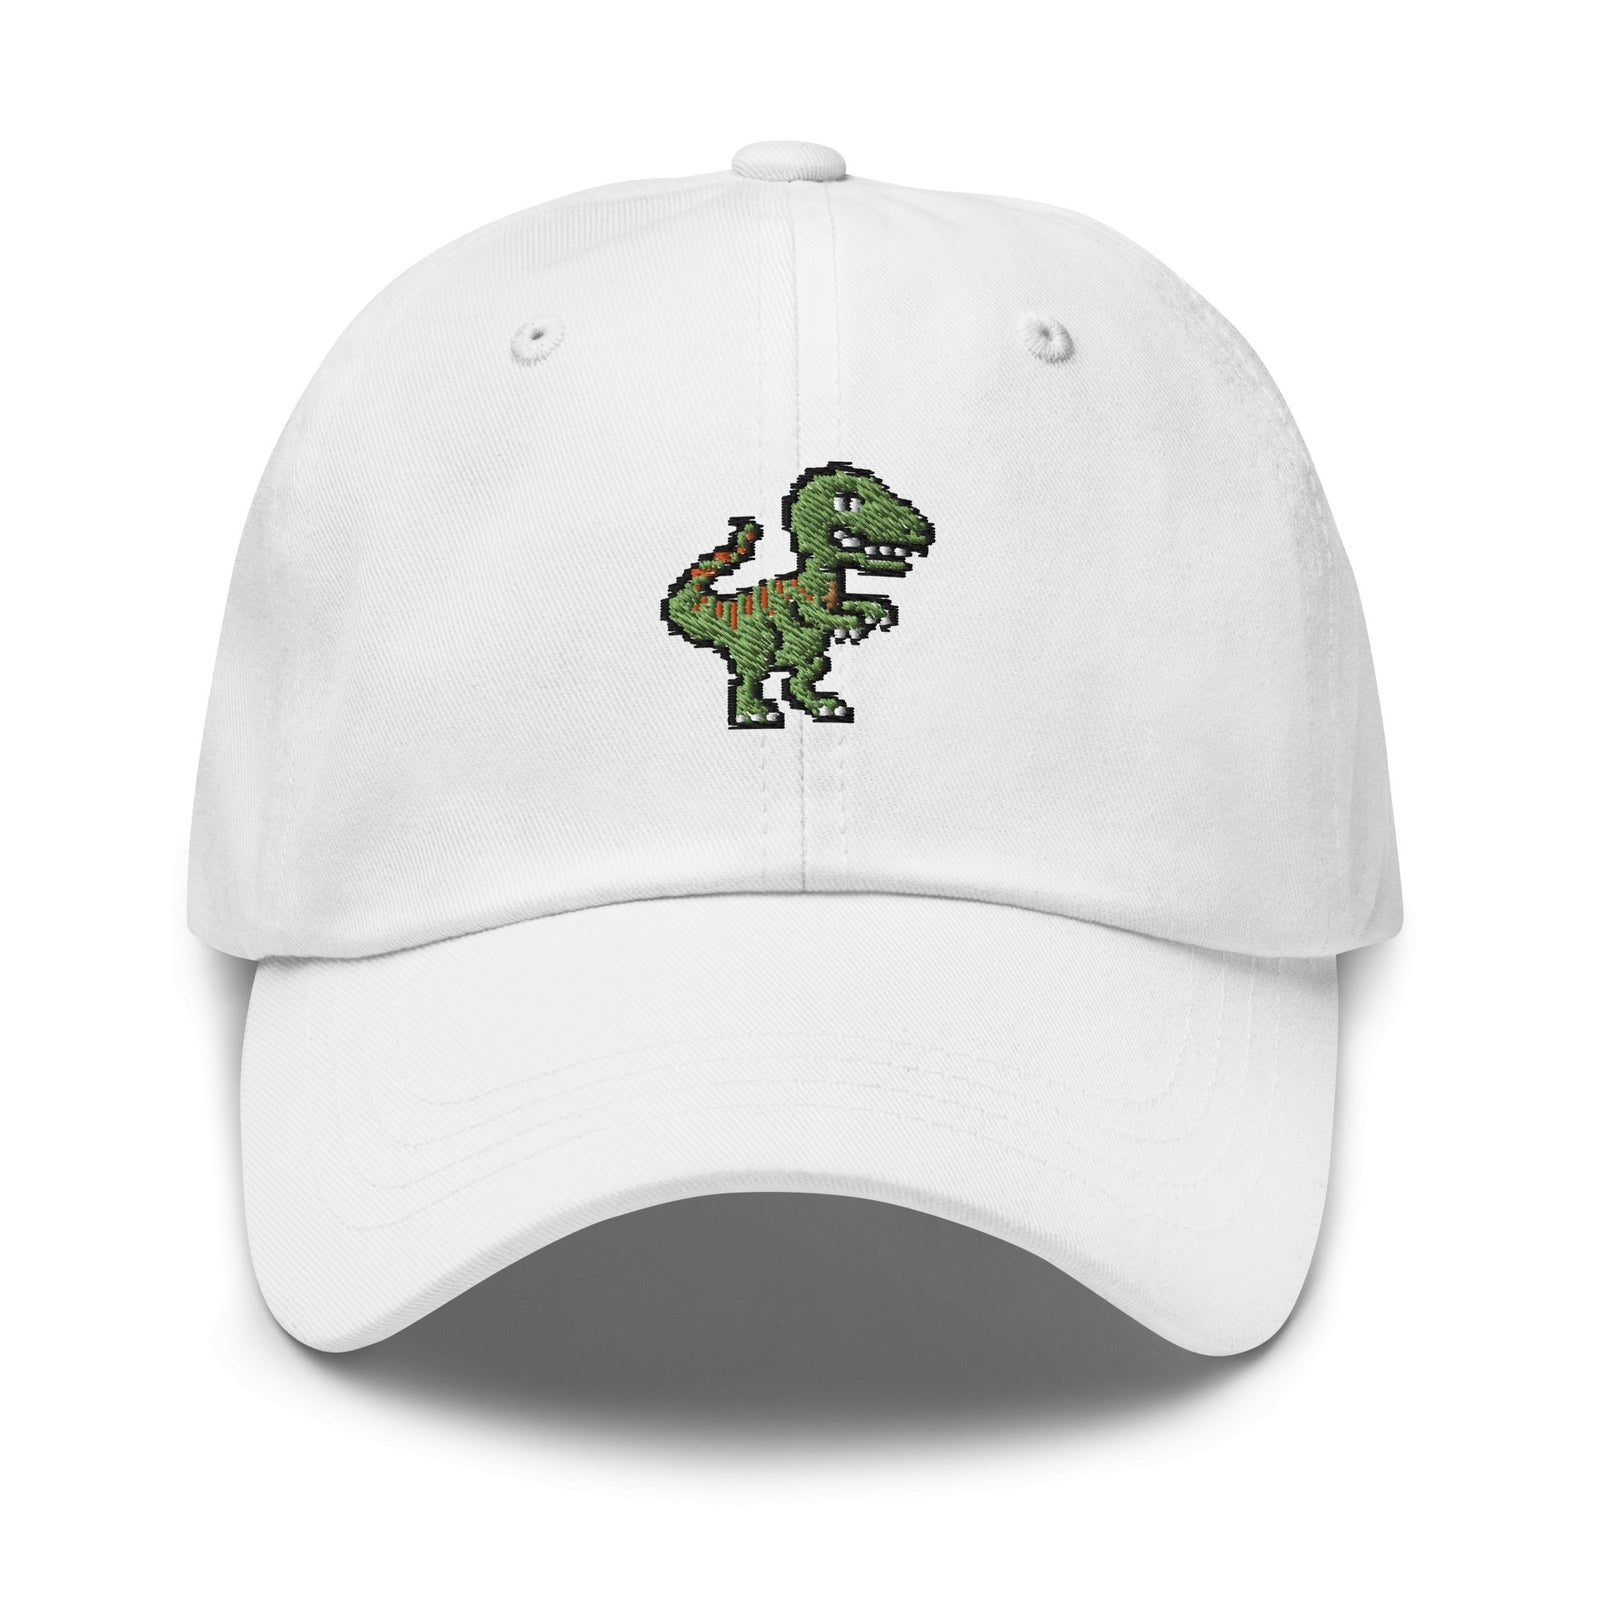 //cdn.shopify.com/s/files/1/0274/2488/2766/products/t-rex-dad-hat-561295_5000x.jpg?v=1652379806 5000w,
    //cdn.shopify.com/s/files/1/0274/2488/2766/products/t-rex-dad-hat-561295_4500x.jpg?v=1652379806 4500w,
    //cdn.shopify.com/s/files/1/0274/2488/2766/products/t-rex-dad-hat-561295_4000x.jpg?v=1652379806 4000w,
    //cdn.shopify.com/s/files/1/0274/2488/2766/products/t-rex-dad-hat-561295_3500x.jpg?v=1652379806 3500w,
    //cdn.shopify.com/s/files/1/0274/2488/2766/products/t-rex-dad-hat-561295_3000x.jpg?v=1652379806 3000w,
    //cdn.shopify.com/s/files/1/0274/2488/2766/products/t-rex-dad-hat-561295_2500x.jpg?v=1652379806 2500w,
    //cdn.shopify.com/s/files/1/0274/2488/2766/products/t-rex-dad-hat-561295_2000x.jpg?v=1652379806 2000w,
    //cdn.shopify.com/s/files/1/0274/2488/2766/products/t-rex-dad-hat-561295_1800x.jpg?v=1652379806 1800w,
    //cdn.shopify.com/s/files/1/0274/2488/2766/products/t-rex-dad-hat-561295_1600x.jpg?v=1652379806 1600w,
    //cdn.shopify.com/s/files/1/0274/2488/2766/products/t-rex-dad-hat-561295_1400x.jpg?v=1652379806 1400w,
    //cdn.shopify.com/s/files/1/0274/2488/2766/products/t-rex-dad-hat-561295_1200x.jpg?v=1652379806 1200w,
    //cdn.shopify.com/s/files/1/0274/2488/2766/products/t-rex-dad-hat-561295_1000x.jpg?v=1652379806 1000w,
    //cdn.shopify.com/s/files/1/0274/2488/2766/products/t-rex-dad-hat-561295_800x.jpg?v=1652379806 800w,
    //cdn.shopify.com/s/files/1/0274/2488/2766/products/t-rex-dad-hat-561295_600x.jpg?v=1652379806 600w,
    //cdn.shopify.com/s/files/1/0274/2488/2766/products/t-rex-dad-hat-561295_400x.jpg?v=1652379806 400w,
    //cdn.shopify.com/s/files/1/0274/2488/2766/products/t-rex-dad-hat-561295_200x.jpg?v=1652379806 200w